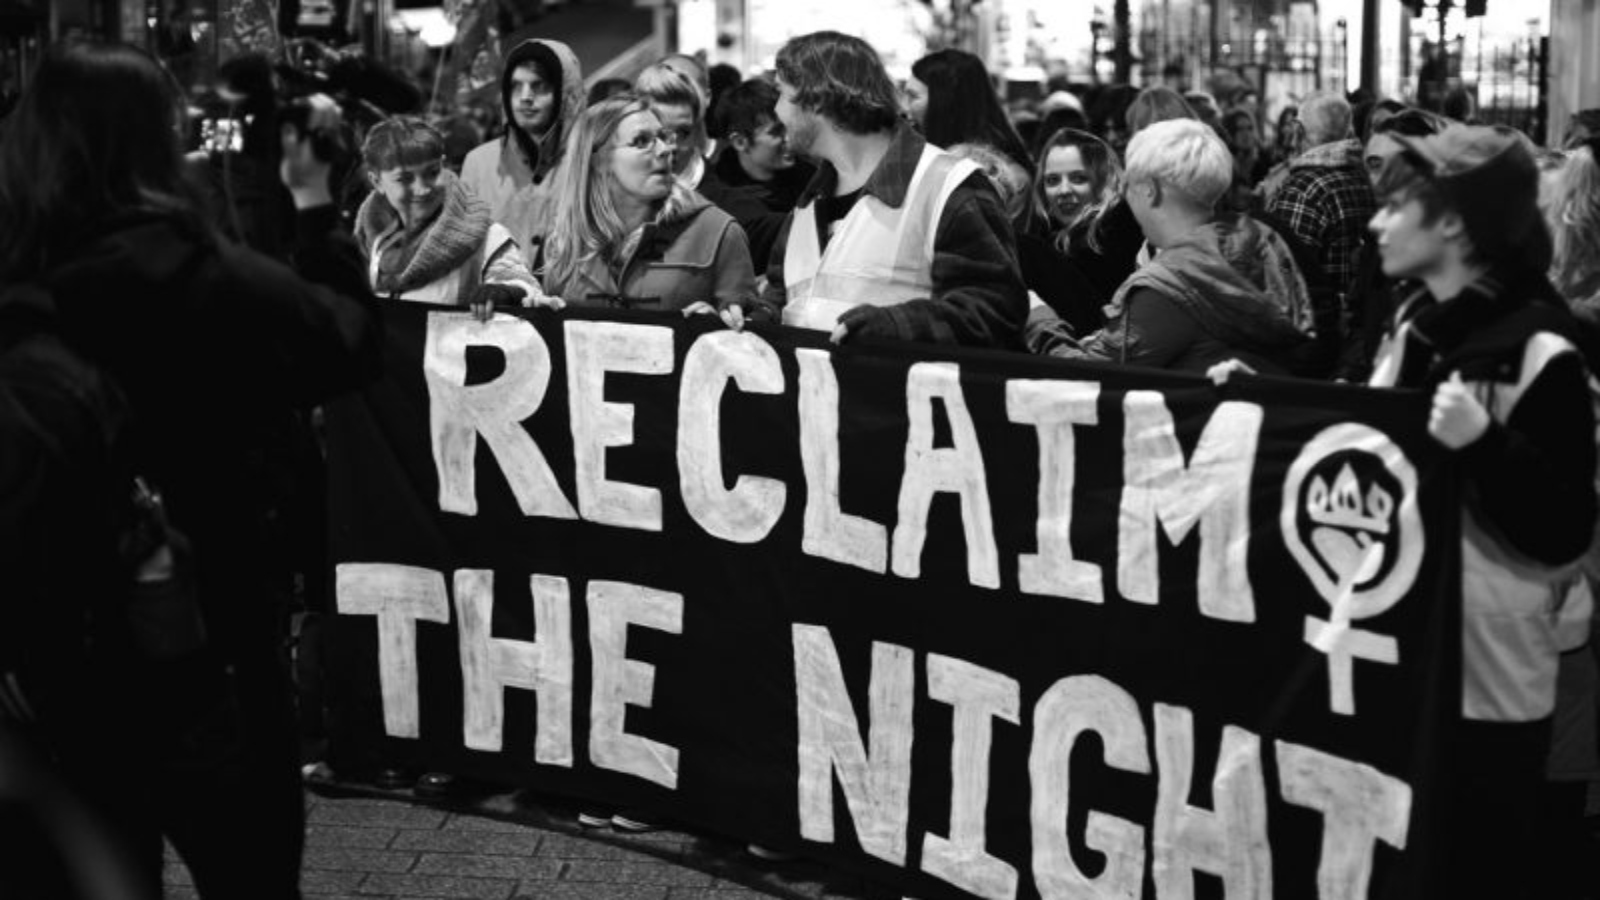 "Reclaim the night" protests for victims of the Yorkshire ripper